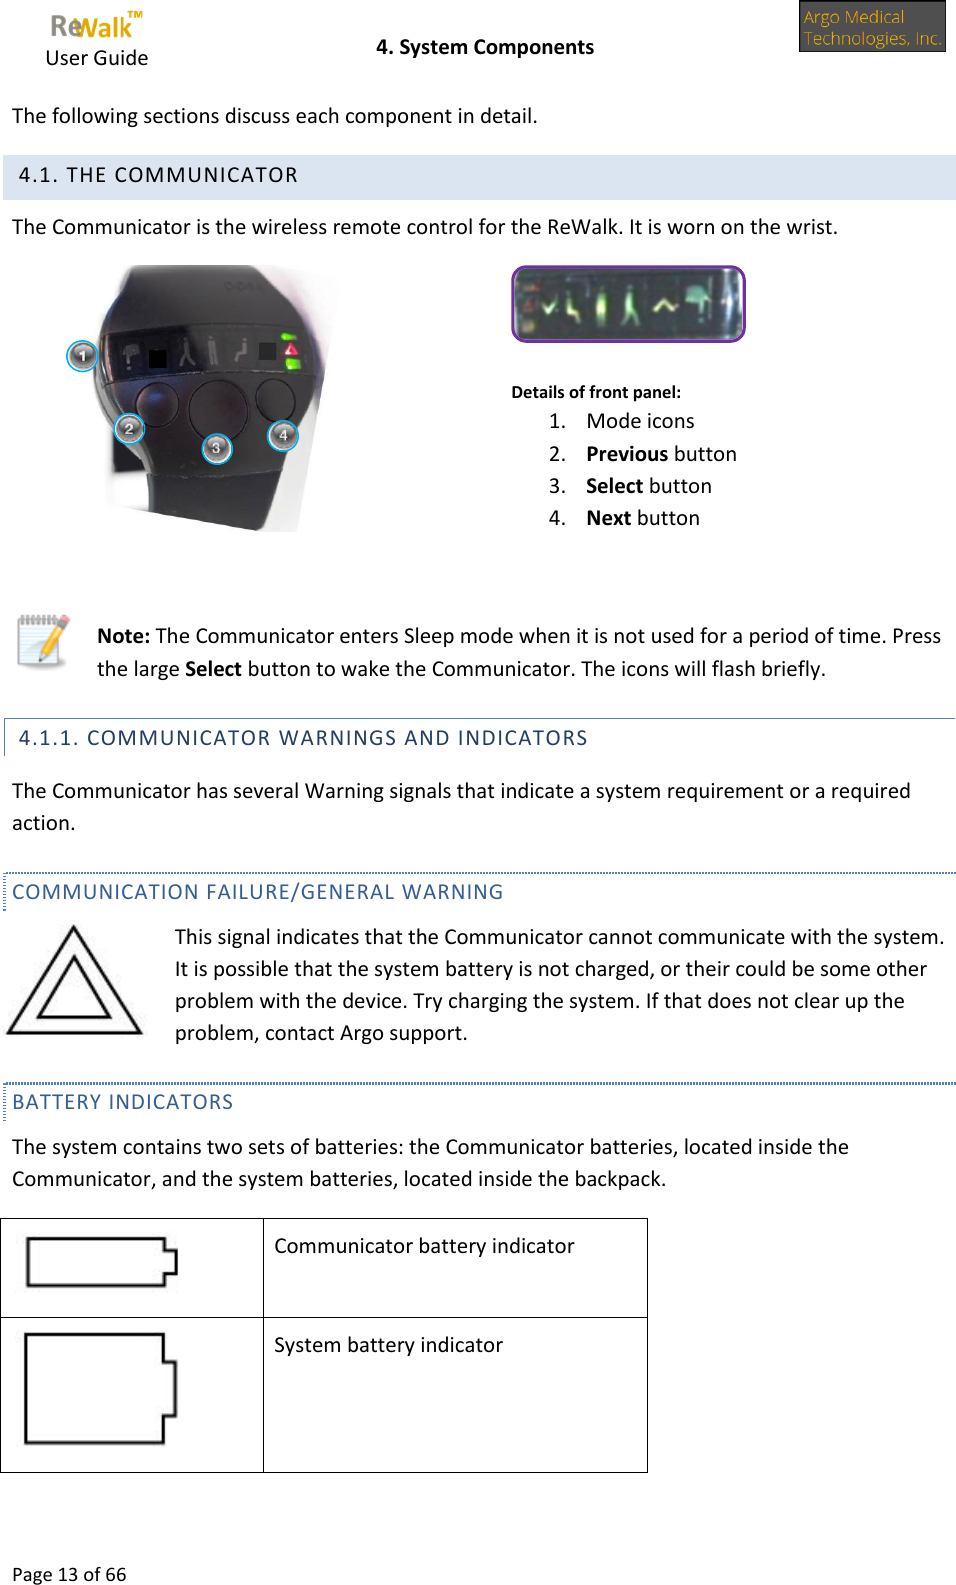     User Guide    4. System Components  Page 13 of 66  The following sections discuss each component in detail.  4.1. THE COMMUNICATOR The Communicator is the wireless remote control for the ReWalk. It is worn on the wrist.   Details of front panel:  1. Mode icons 2. Previous button 3. Select button 4. Next button    Note: The Communicator enters Sleep mode when it is not used for a period of time. Press the large Select button to wake the Communicator. The icons will flash briefly.  4.1.1. COMMUNICATOR WARNINGS AND INDICATORS The Communicator has several Warning signals that indicate a system requirement or a required action. COMMUNICATION FAILURE/GENERAL WARNING This signal indicates that the Communicator cannot communicate with the system. It is possible that the system battery is not charged, or their could be some other problem with the device. Try charging the system. If that does not clear up the problem, contact Argo support.  BATTERY INDICATORS The system contains two sets of batteries: the Communicator batteries, located inside the Communicator, and the system batteries, located inside the backpack.   Communicator battery indicator  System battery indicator  